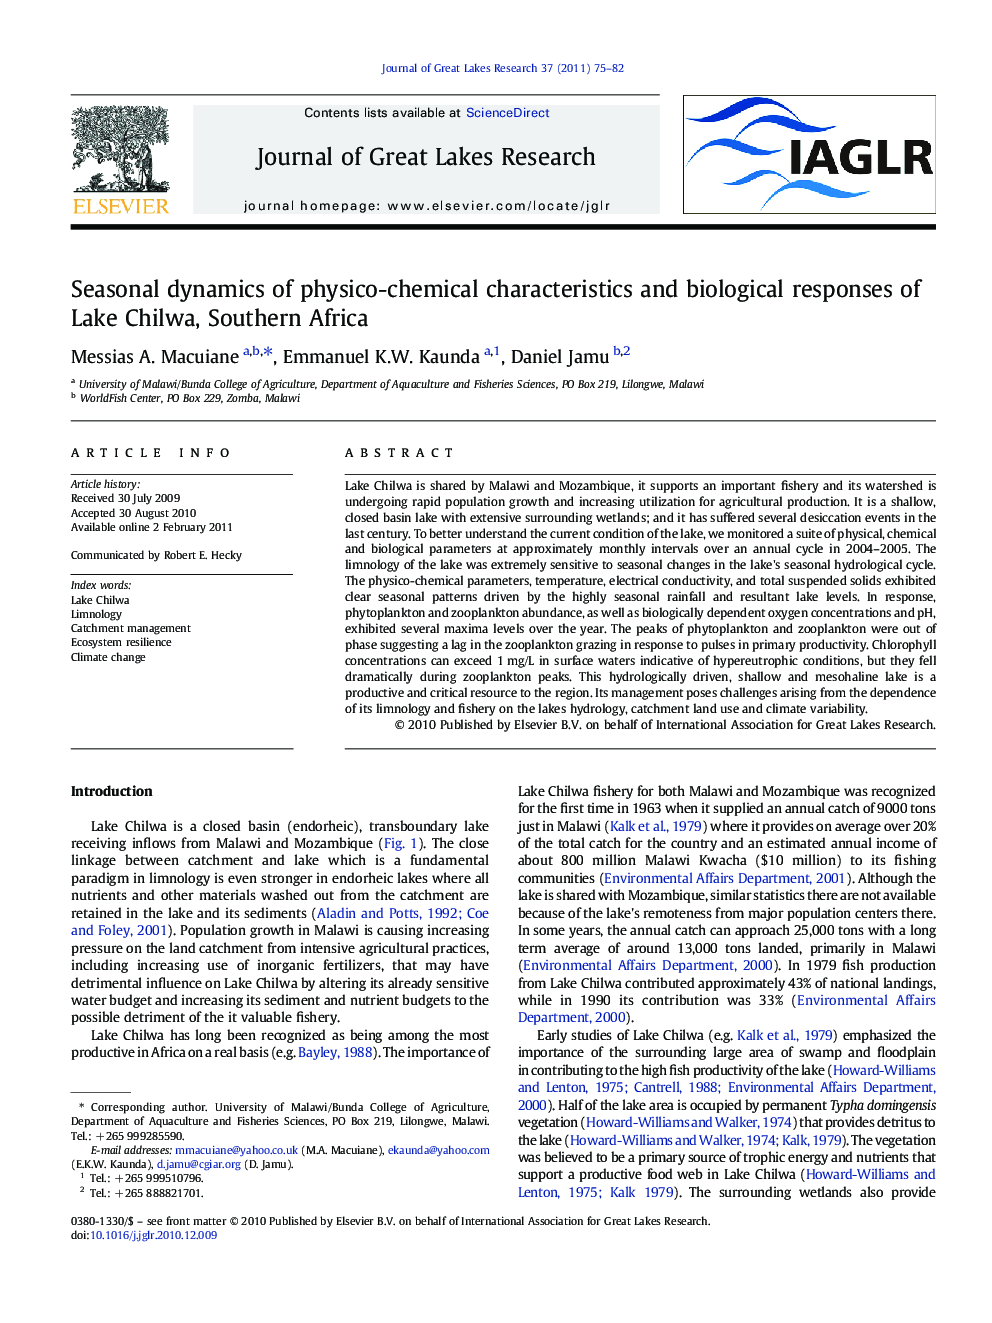 Seasonal dynamics of physico-chemical characteristics and biological responses of Lake Chilwa, Southern Africa